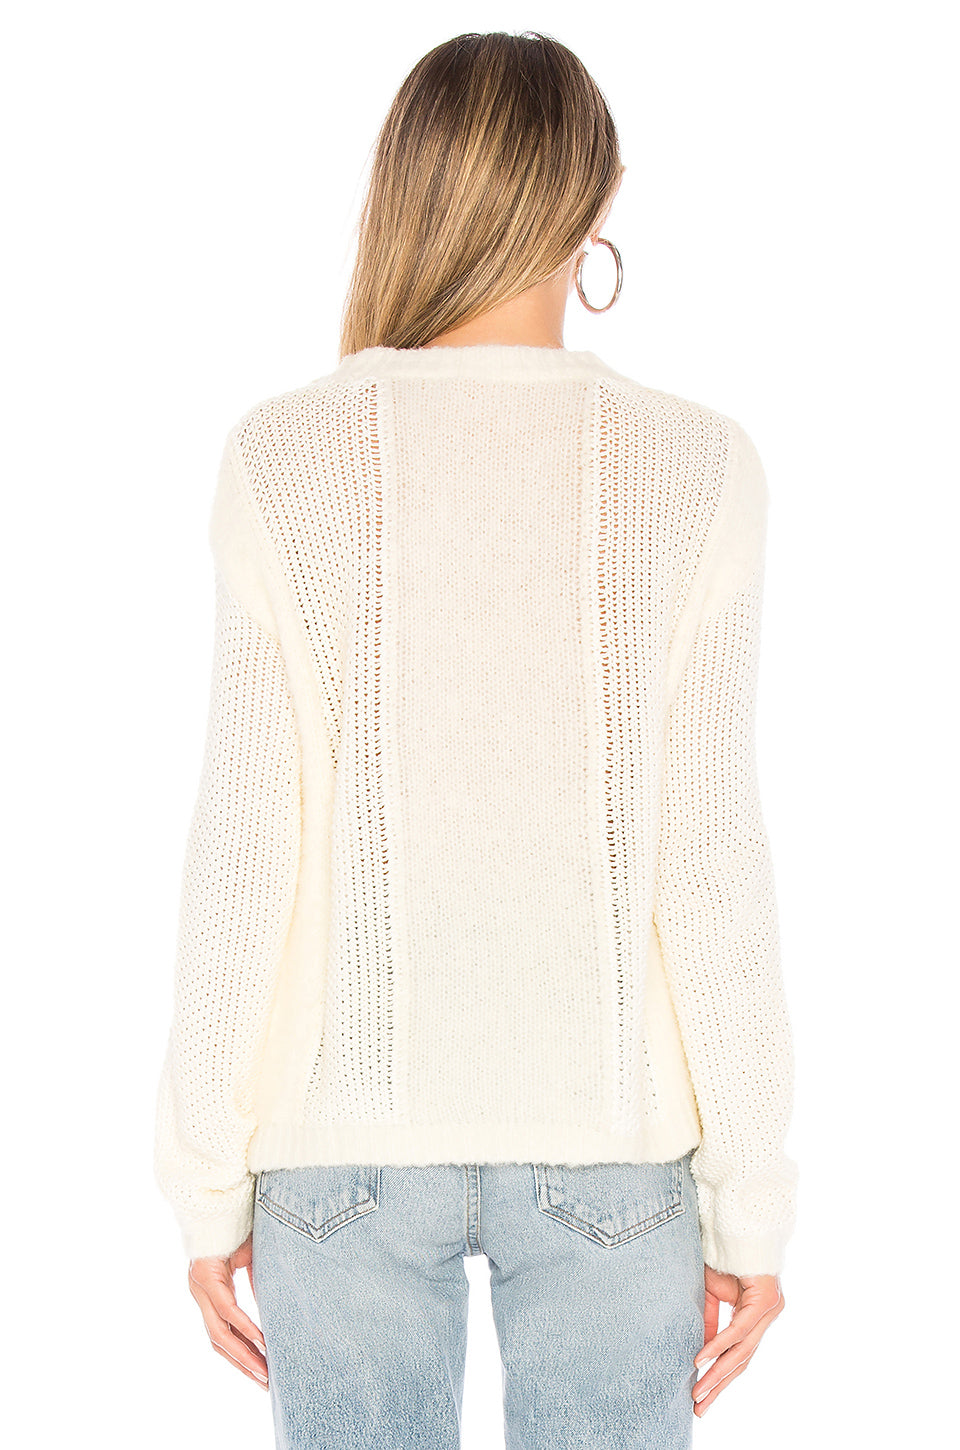 Shirley Sweater in OFF WHITE